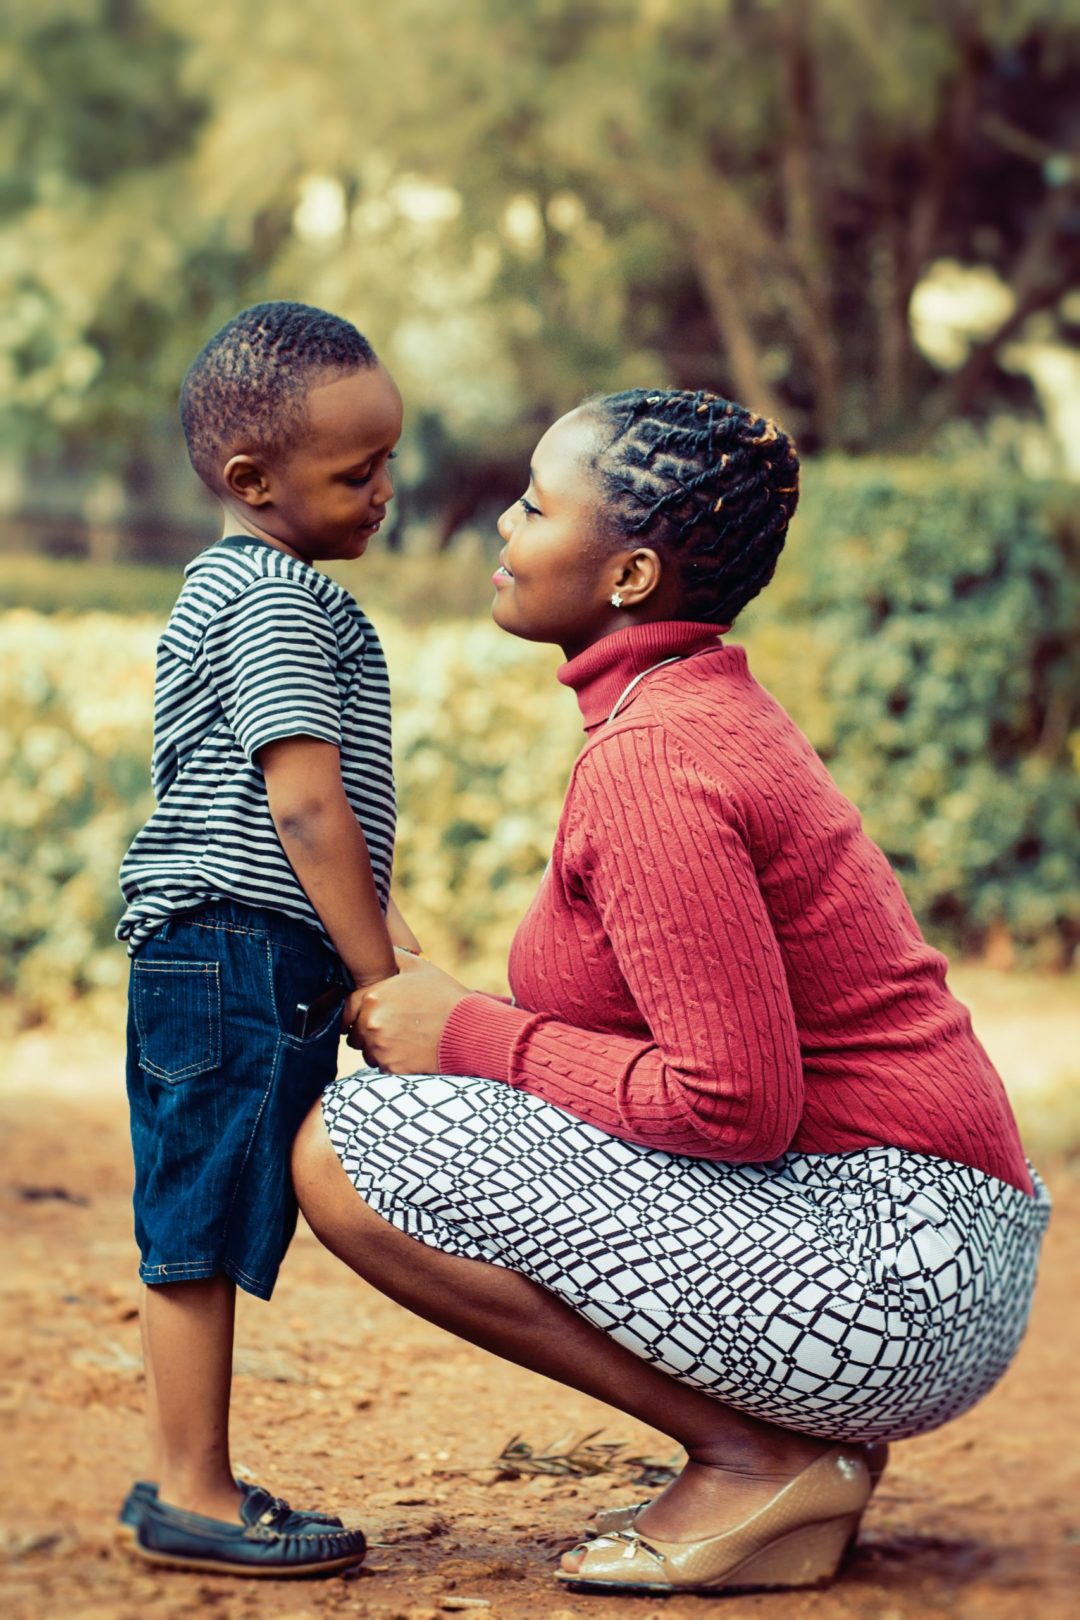 5 Nigerian mums share the most memorable thing their child has said to them